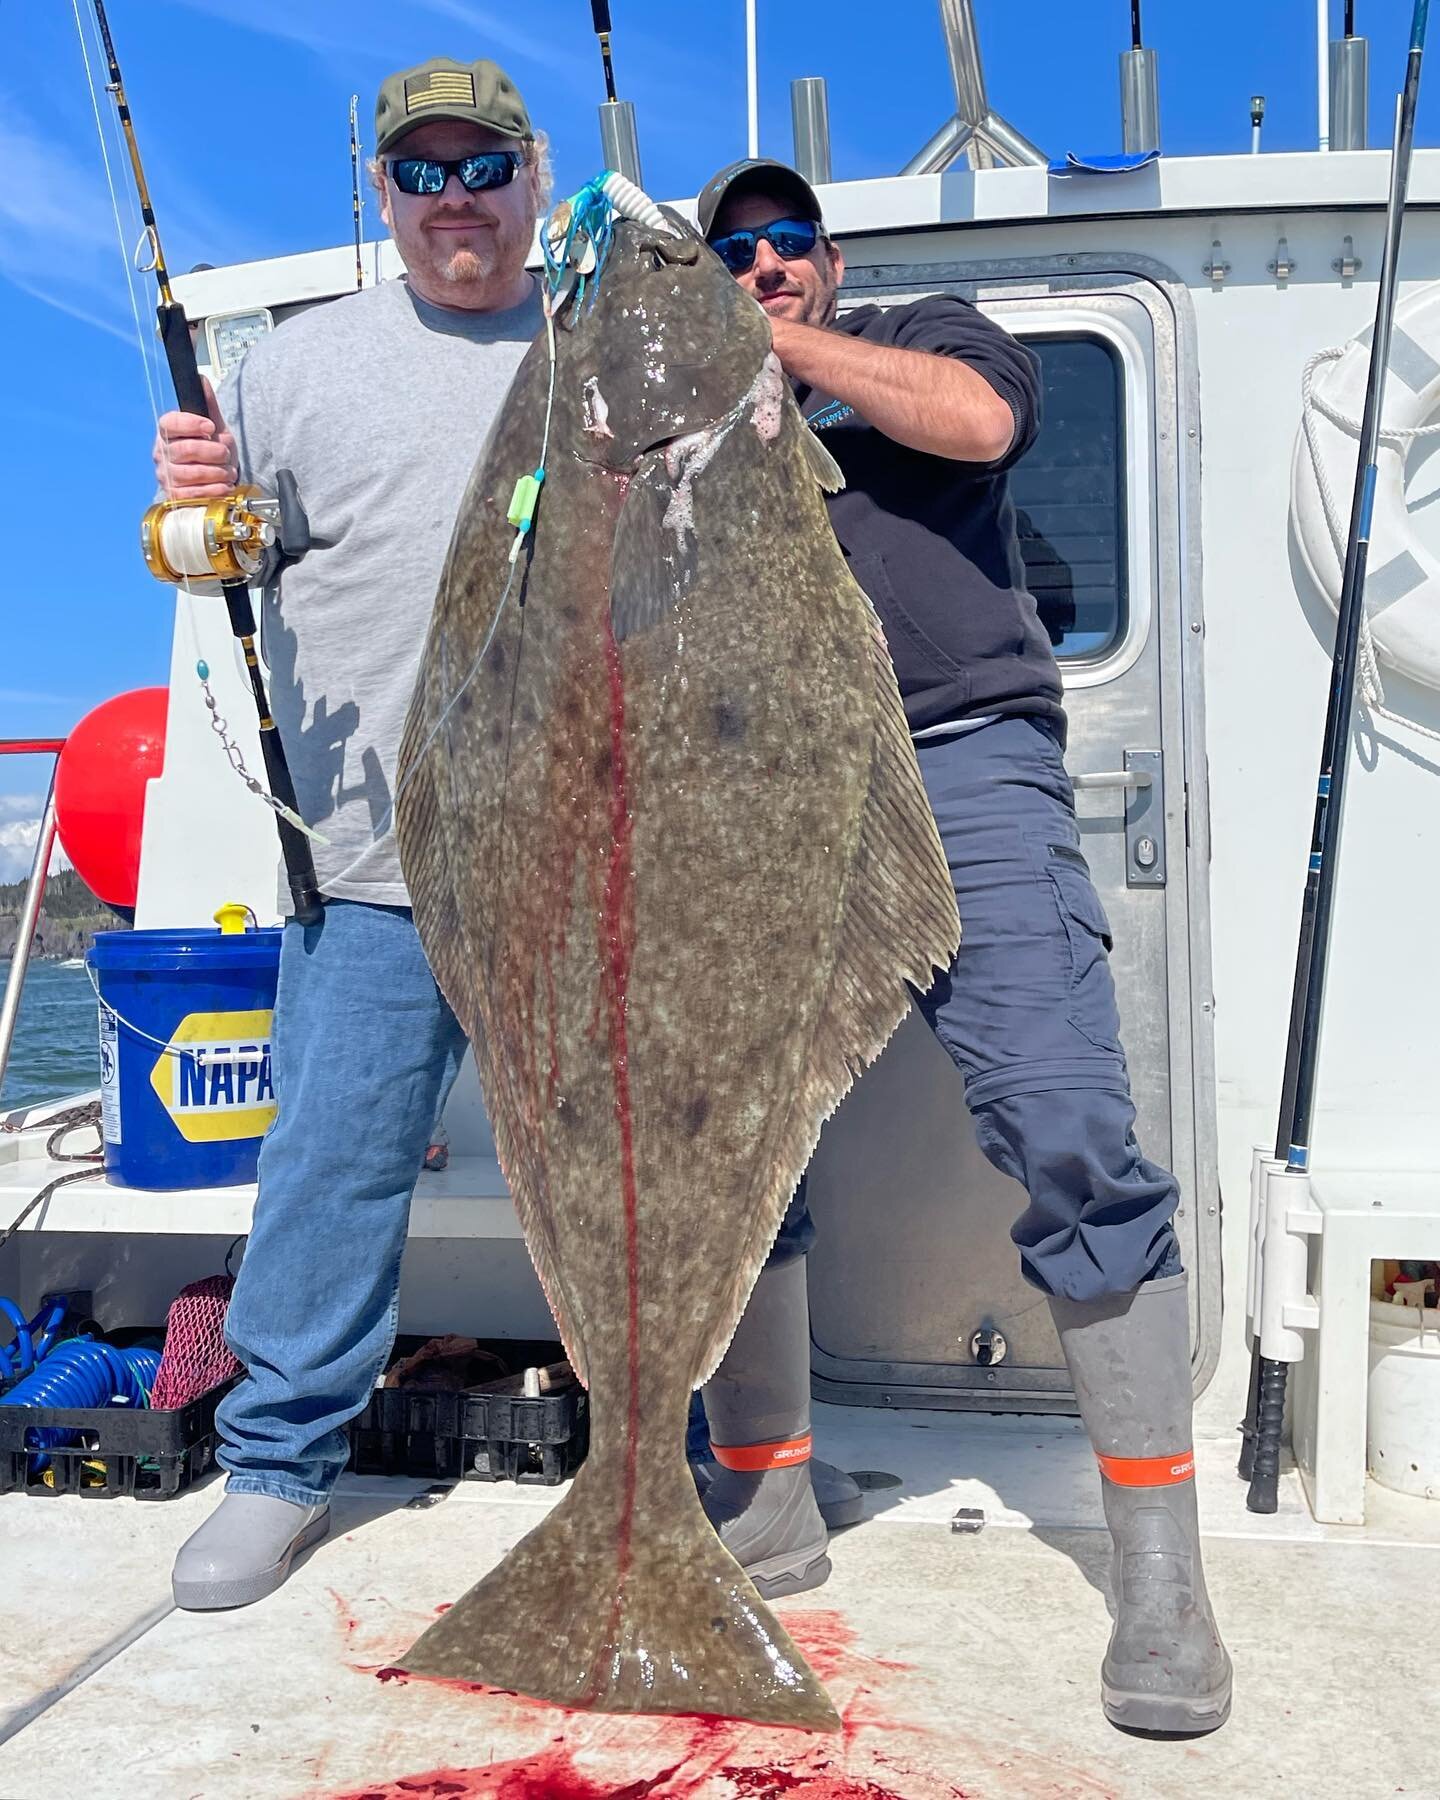 Both halibut boats out yesterday coming in with nice loads of fish. We have 2 boats available for booking tomorrow June 5th&hellip;. Call 907-304-3474 or book online on our website https://www.valdezsaltwateradventures.com. 🤟🏻🤟🏻🎣🎣